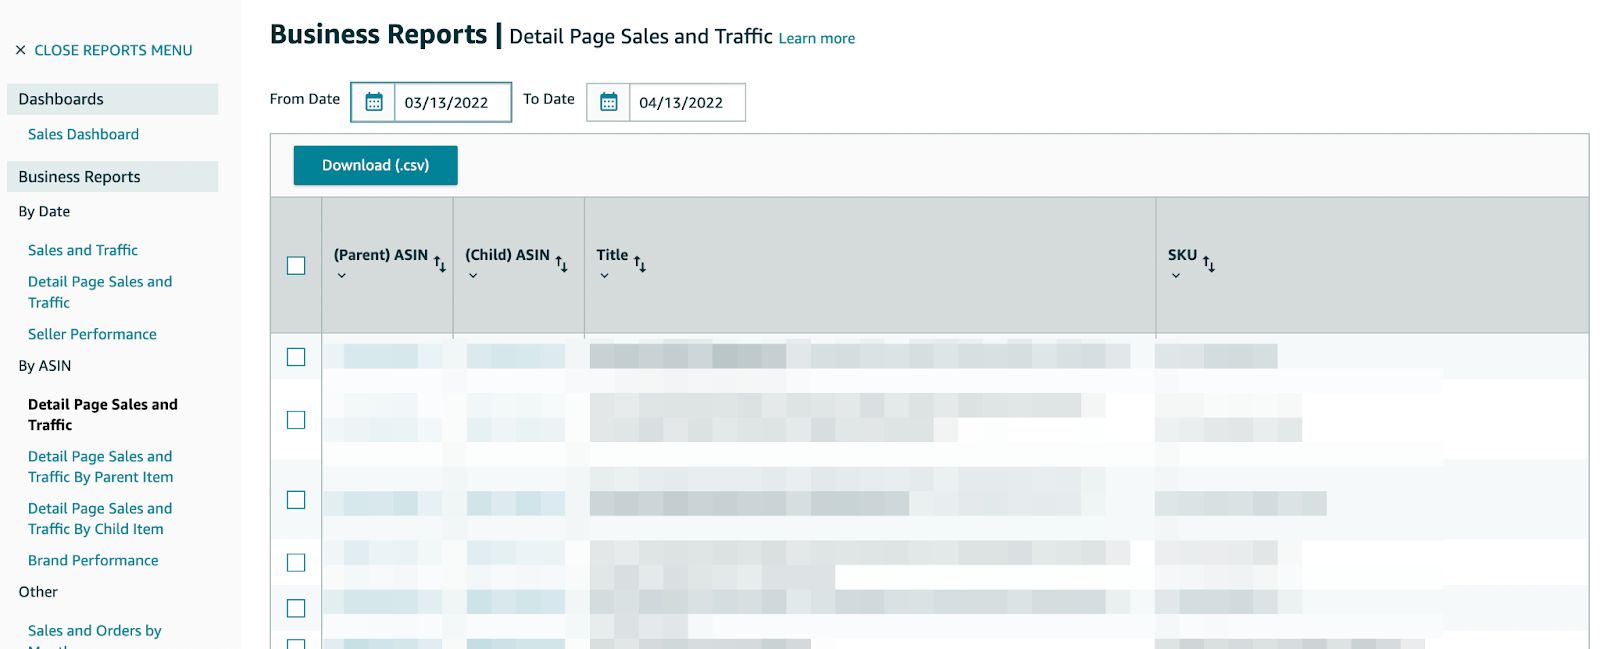 Detail Page Sales and Traffic